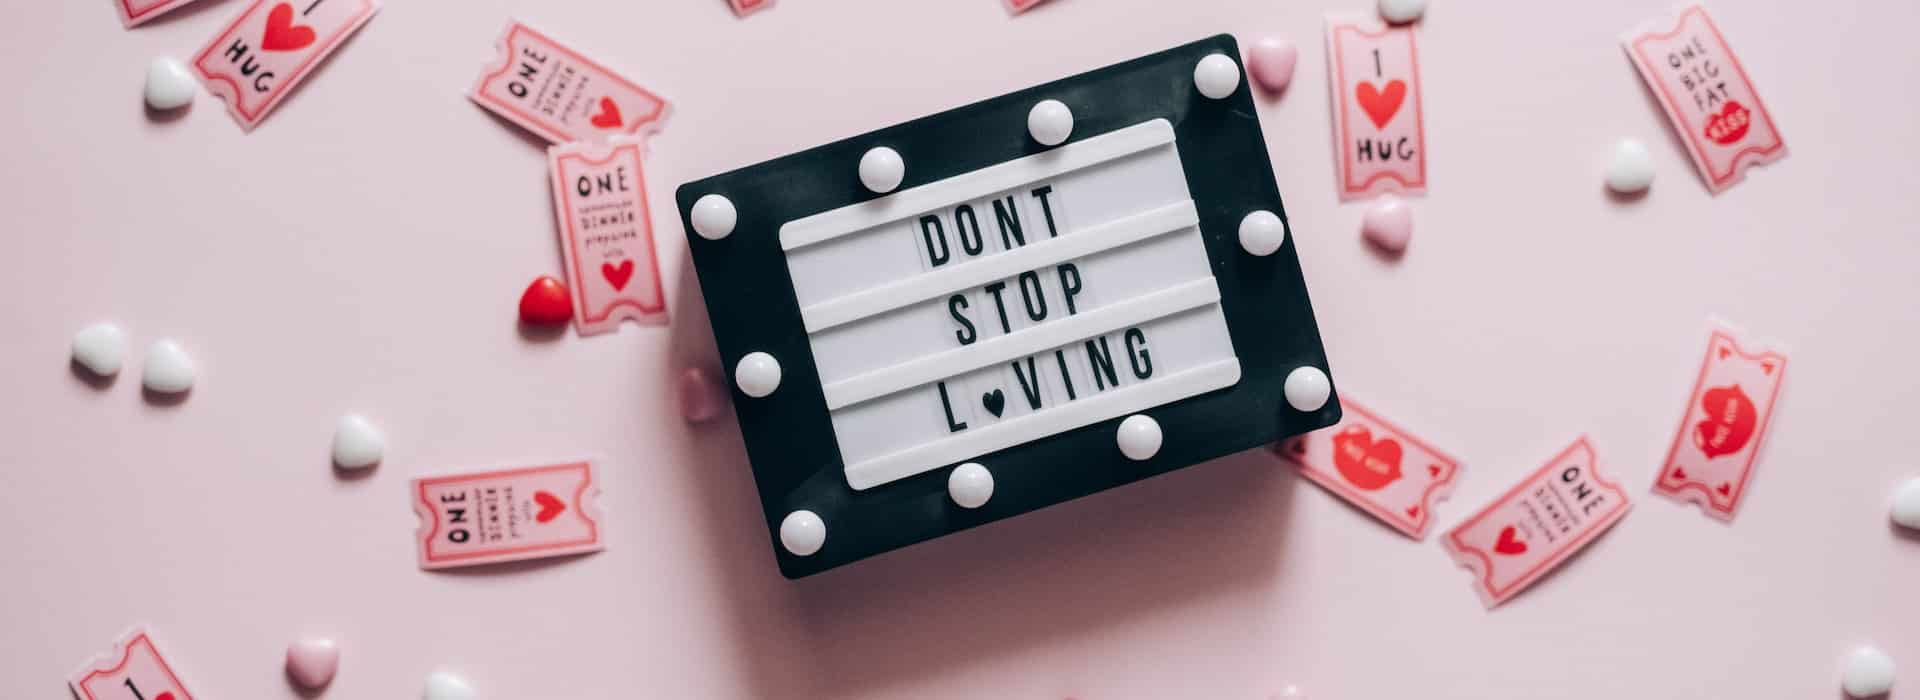 Photo by Leeloo Thefirst: https://www.pexels.com/photo/a-letterboard-on-pink-surface-surrounded-with-pink-tickets-6675832/